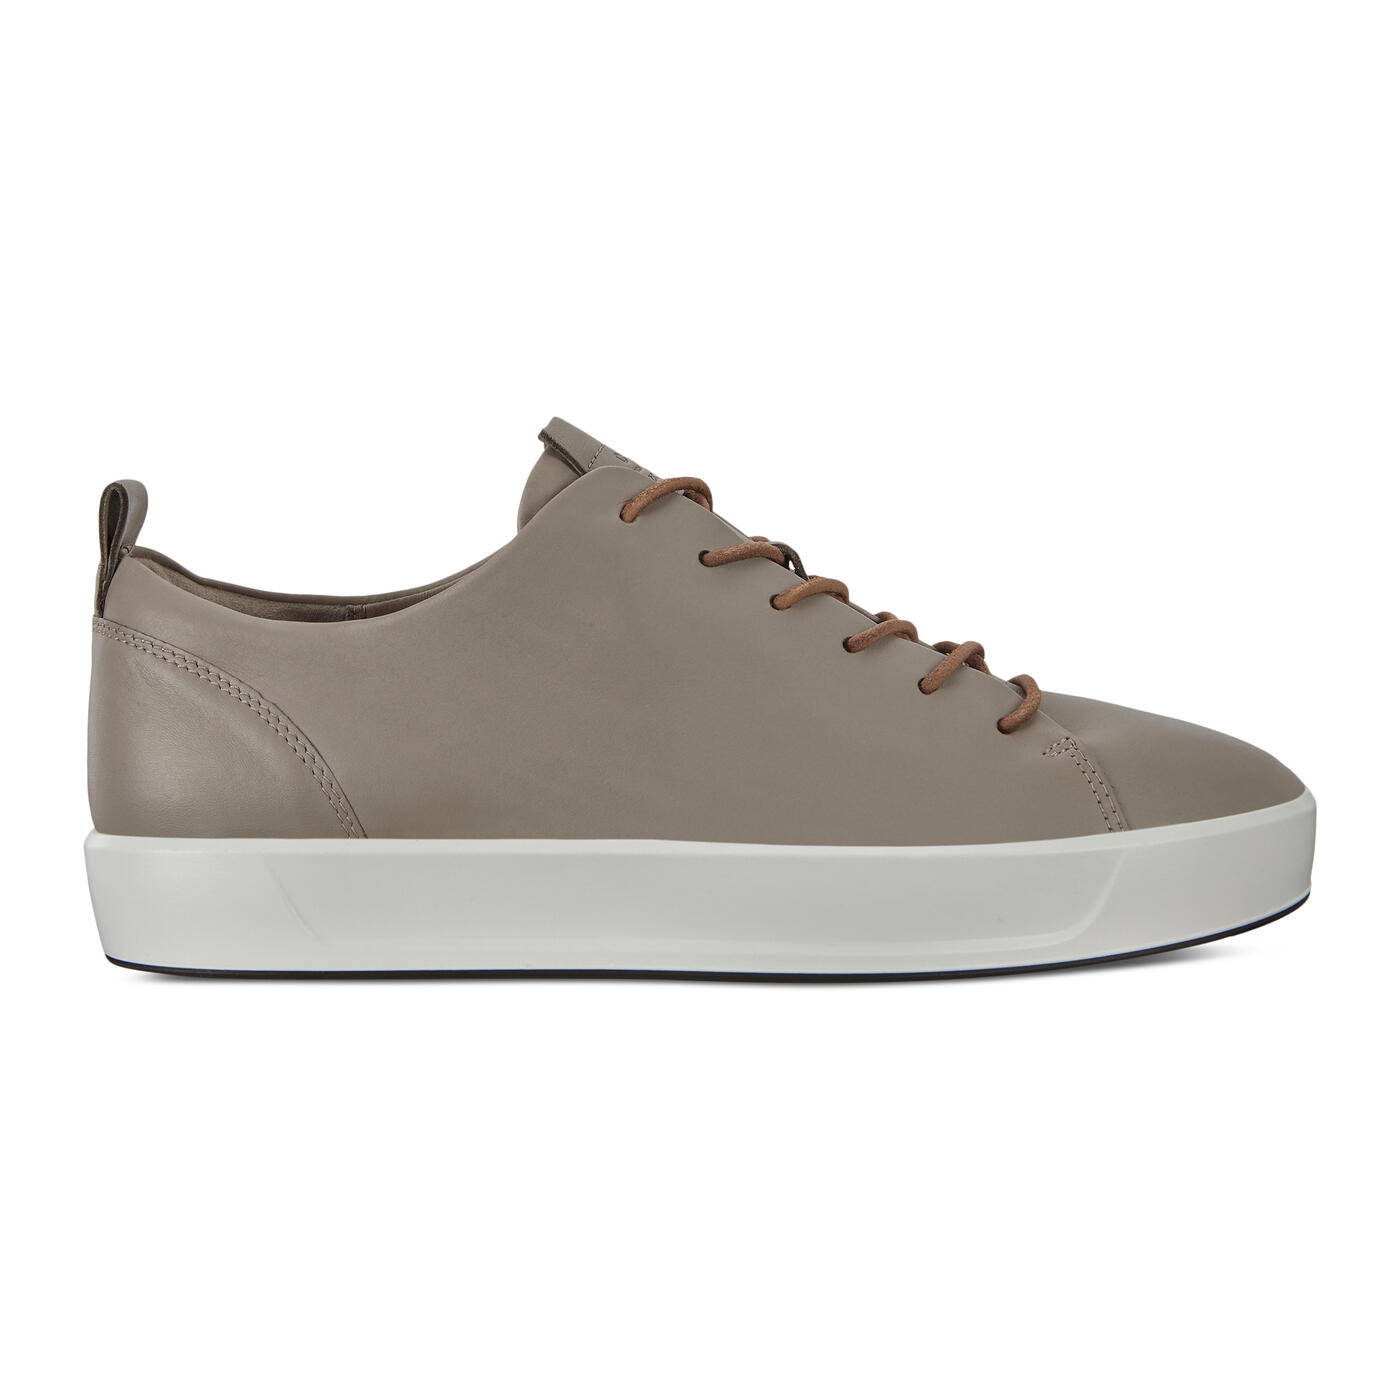 Men's Soft 8 Leather-Lace Sneakers | Official ECCO® Shoes